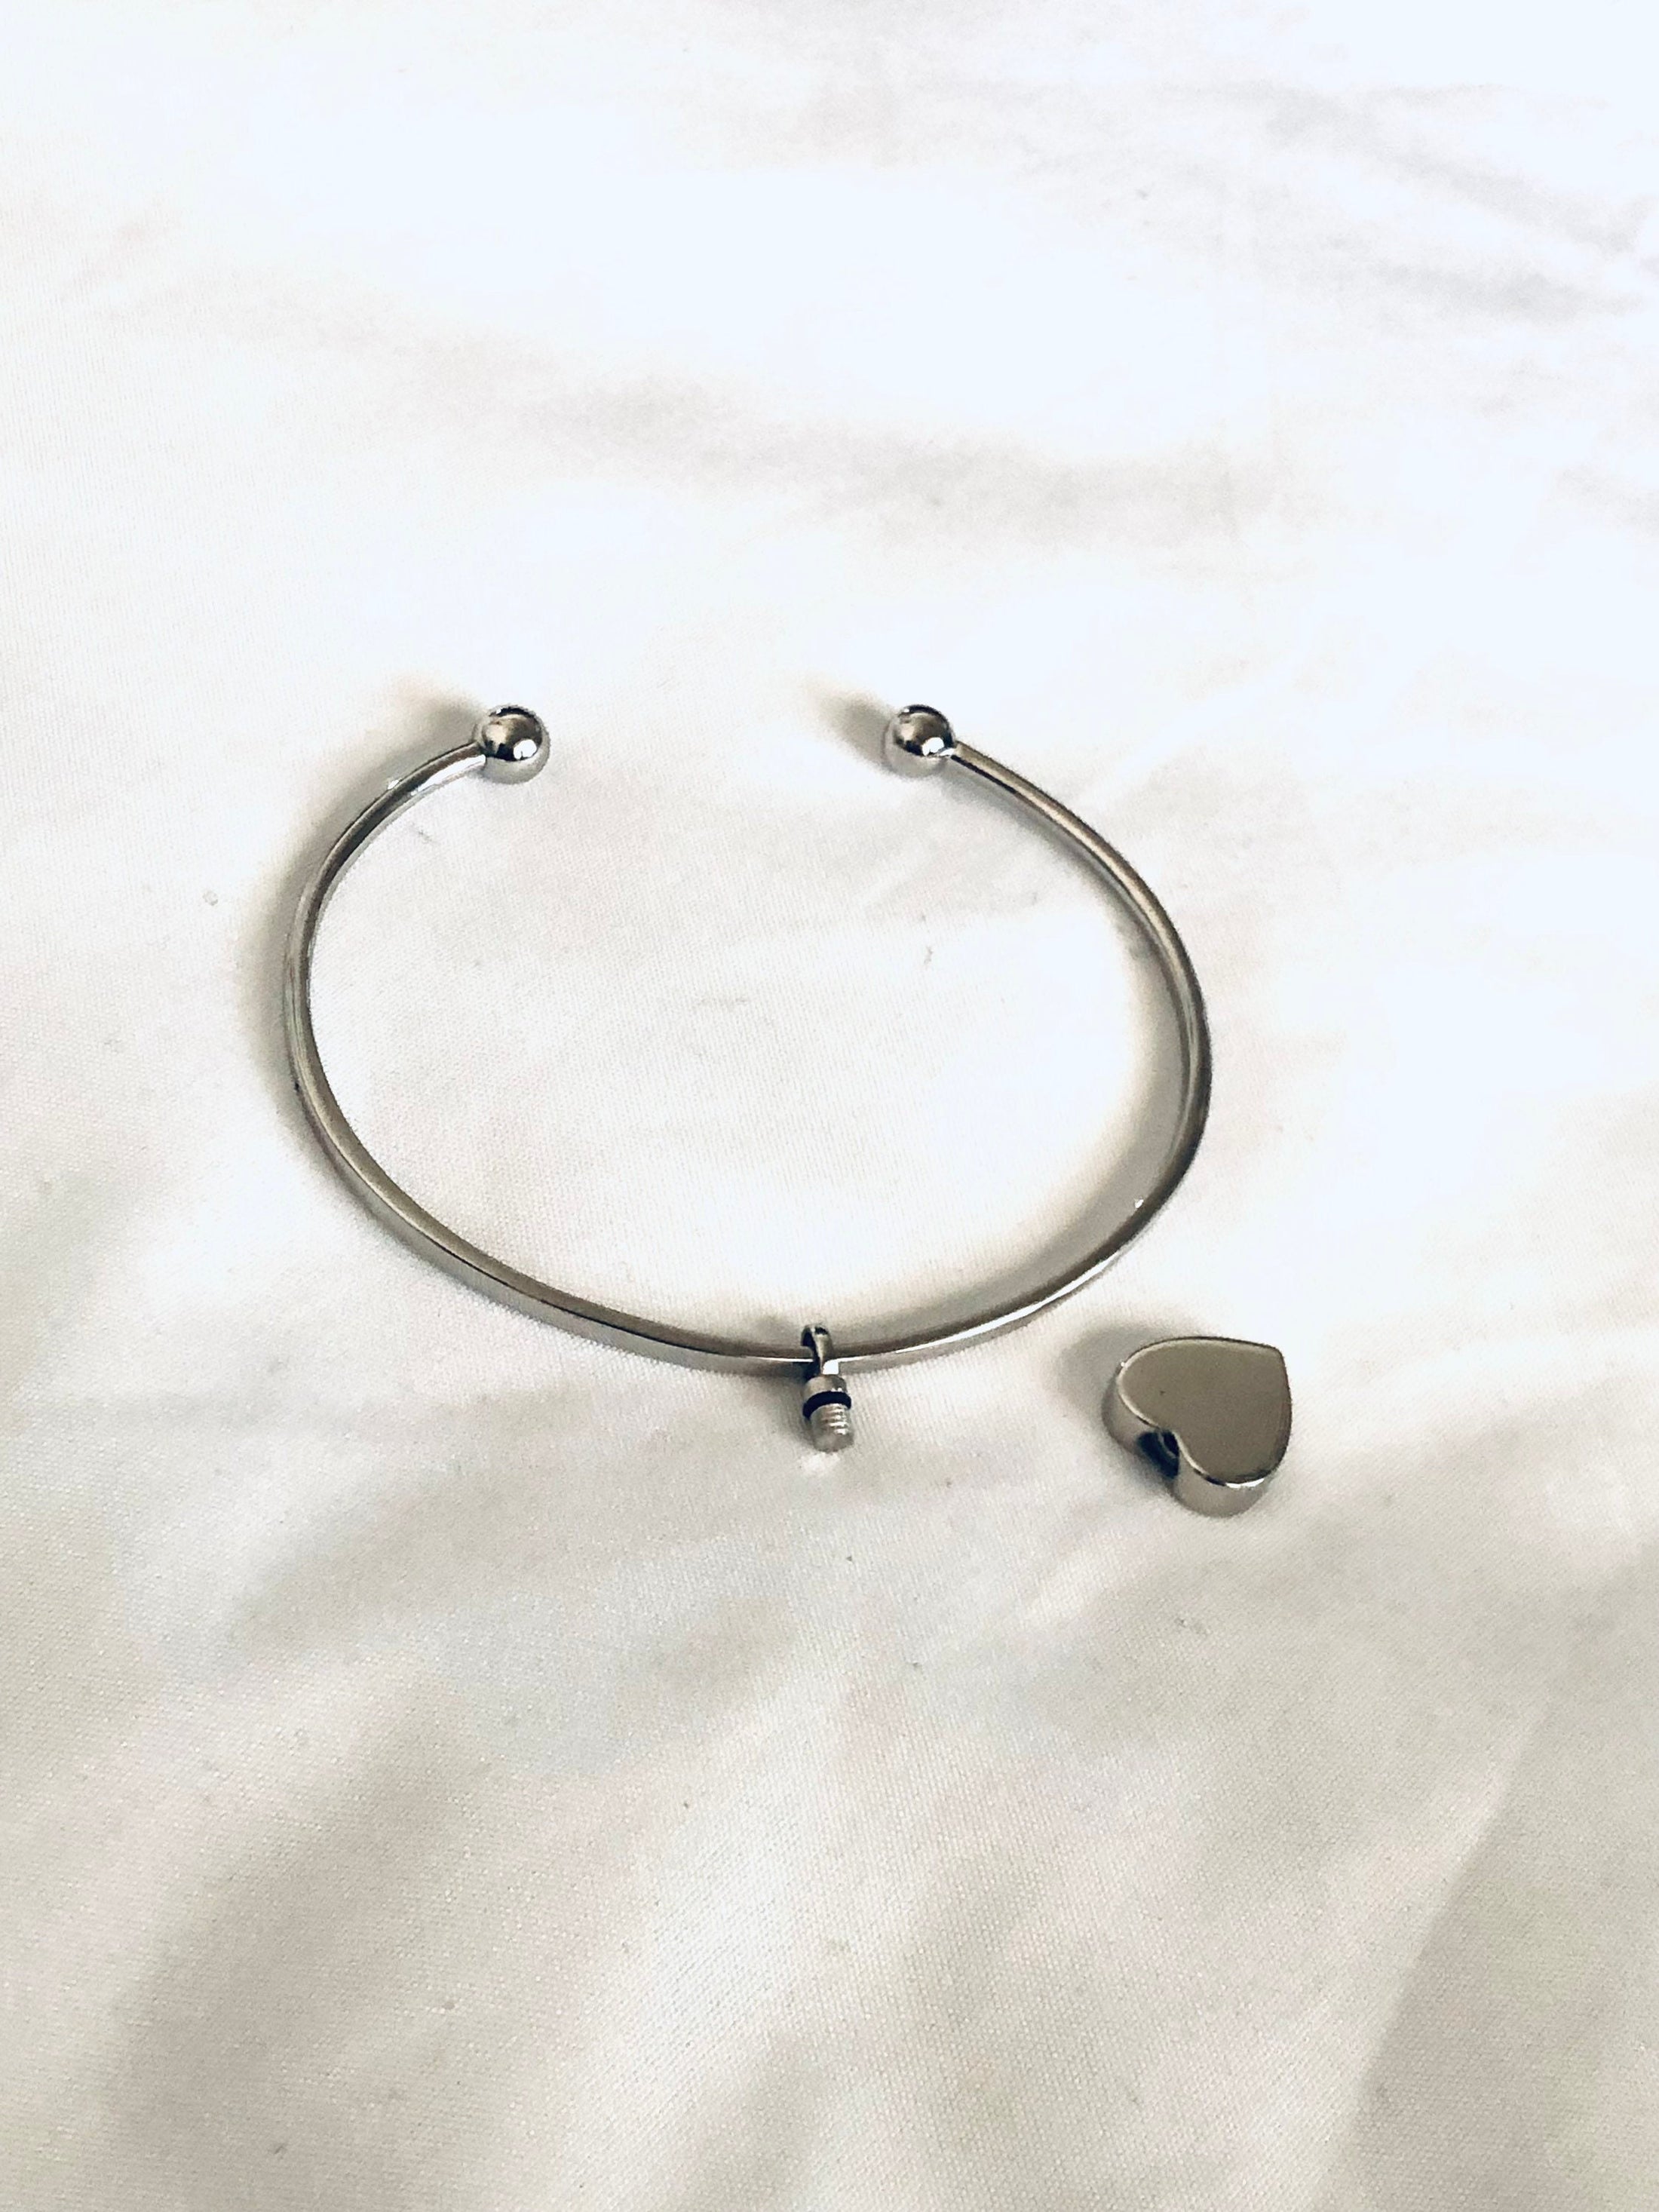 Cremation Urn Bracelet For Women | Urn Bangle For Human or Pet Ashes 14K Gold Vermeil | Cremation Urn | Ashes Holder Jewelry | Urn Jewelry